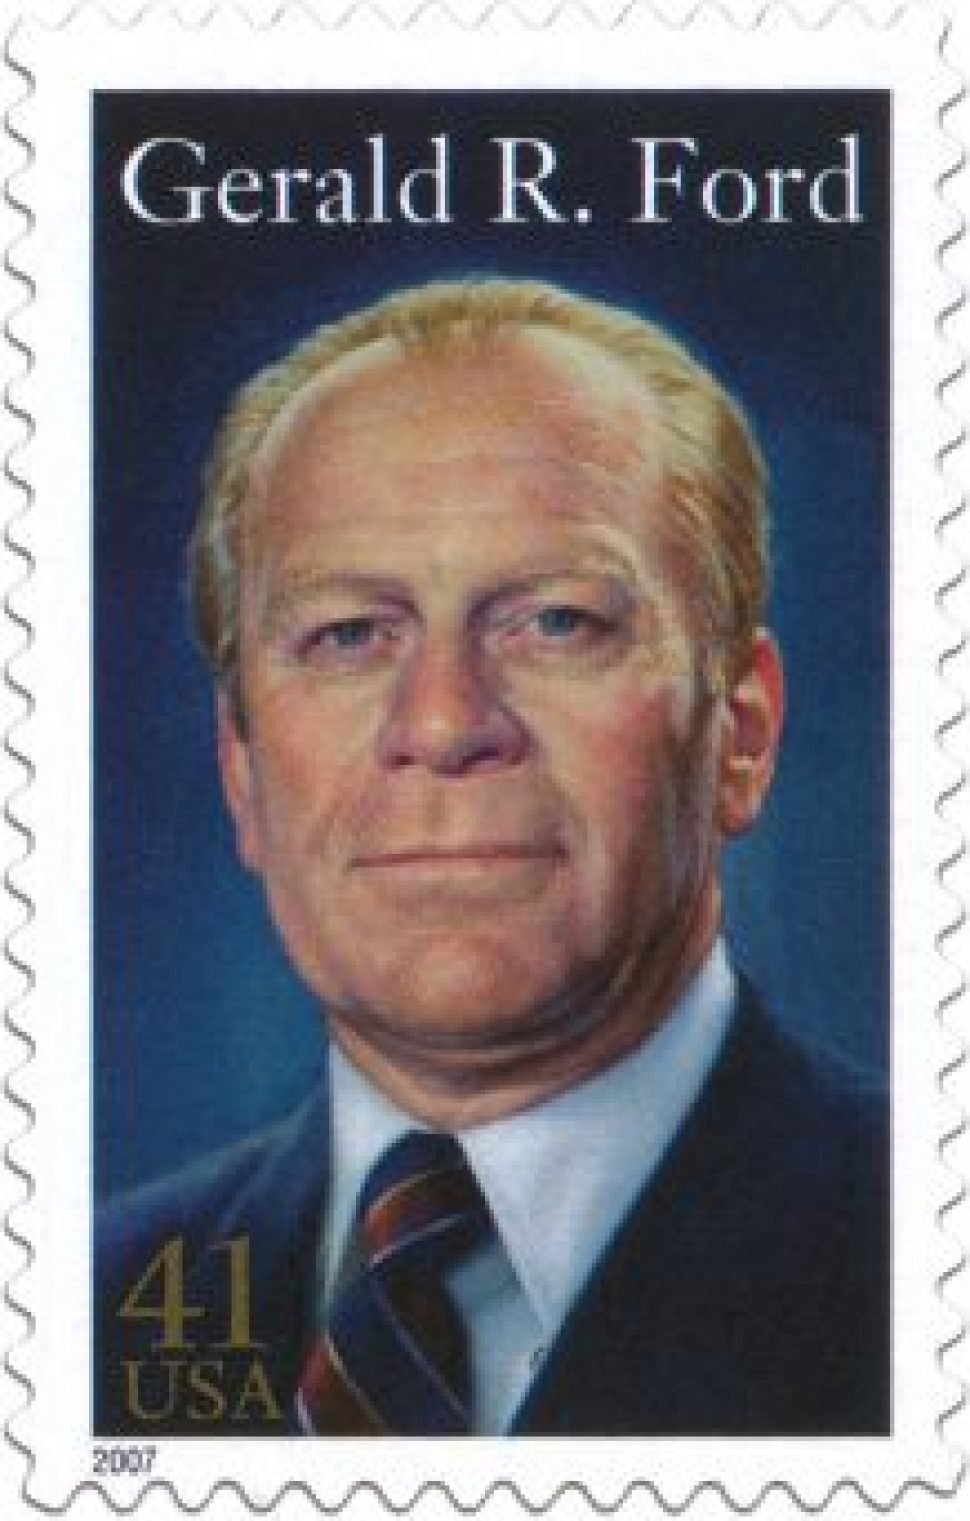 41 cent USA stamp featuring Gerald Ford